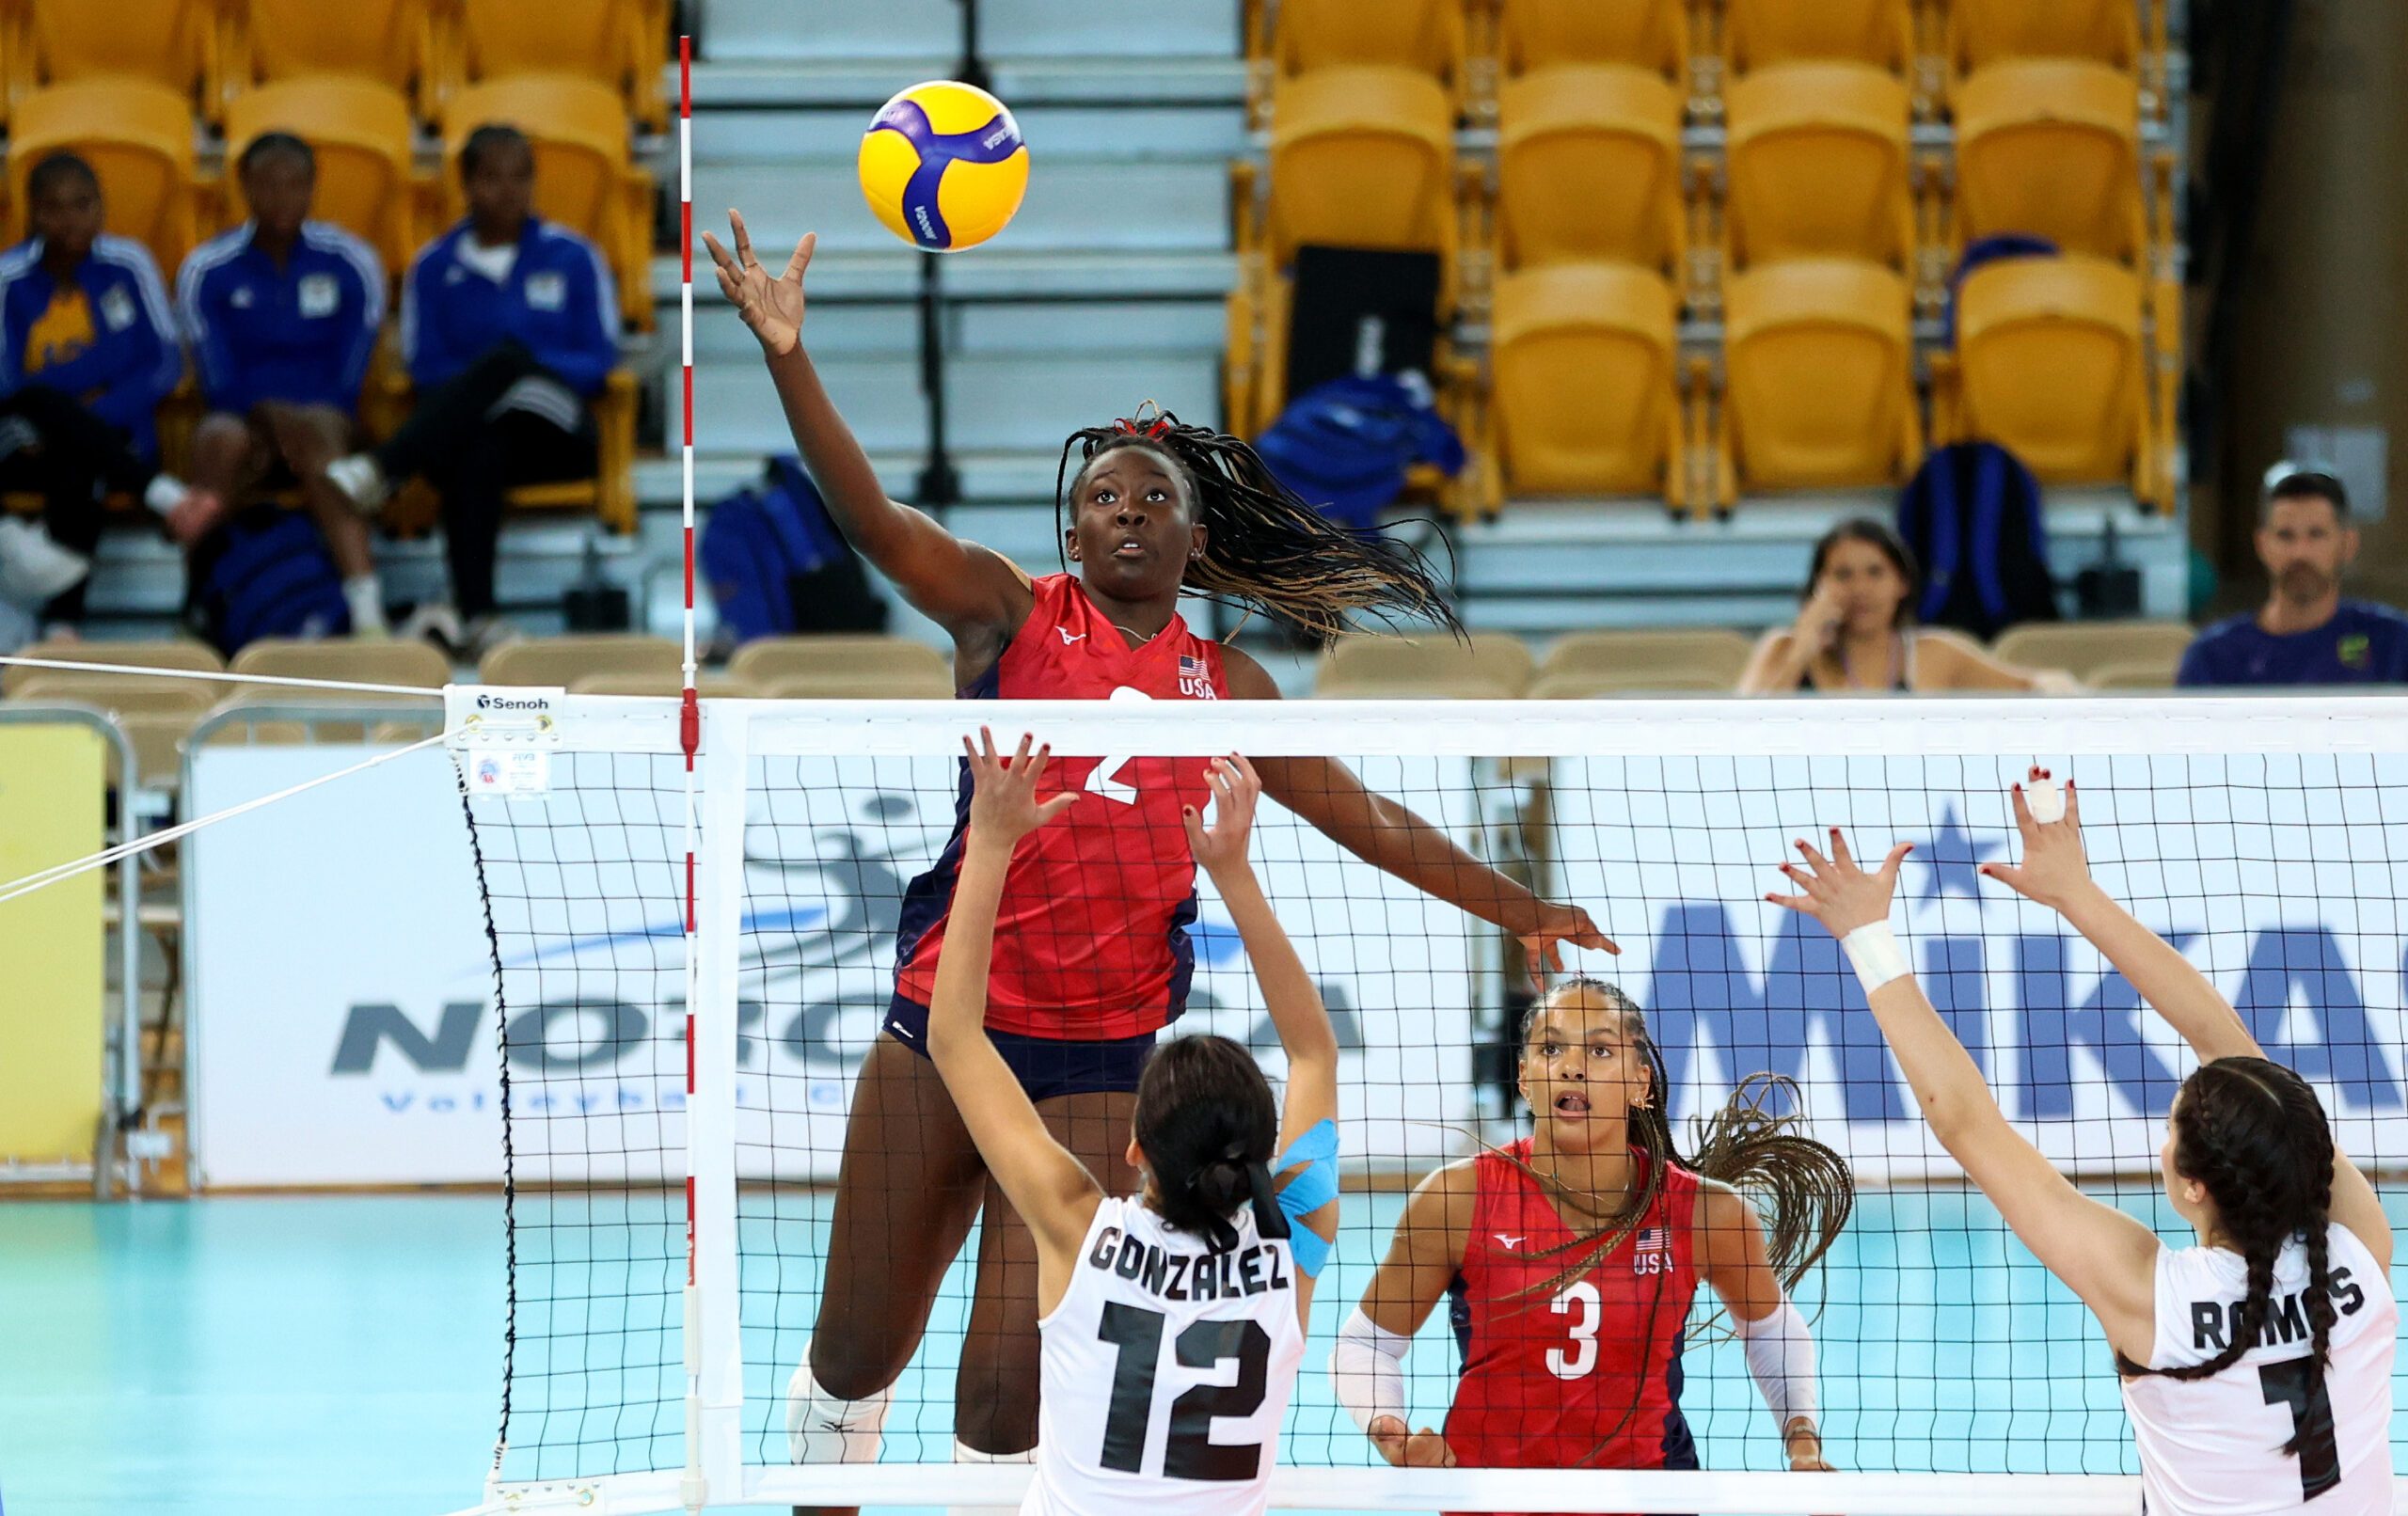 Jaela Auguste hits in the Pan Am Cup match vs. Mexico